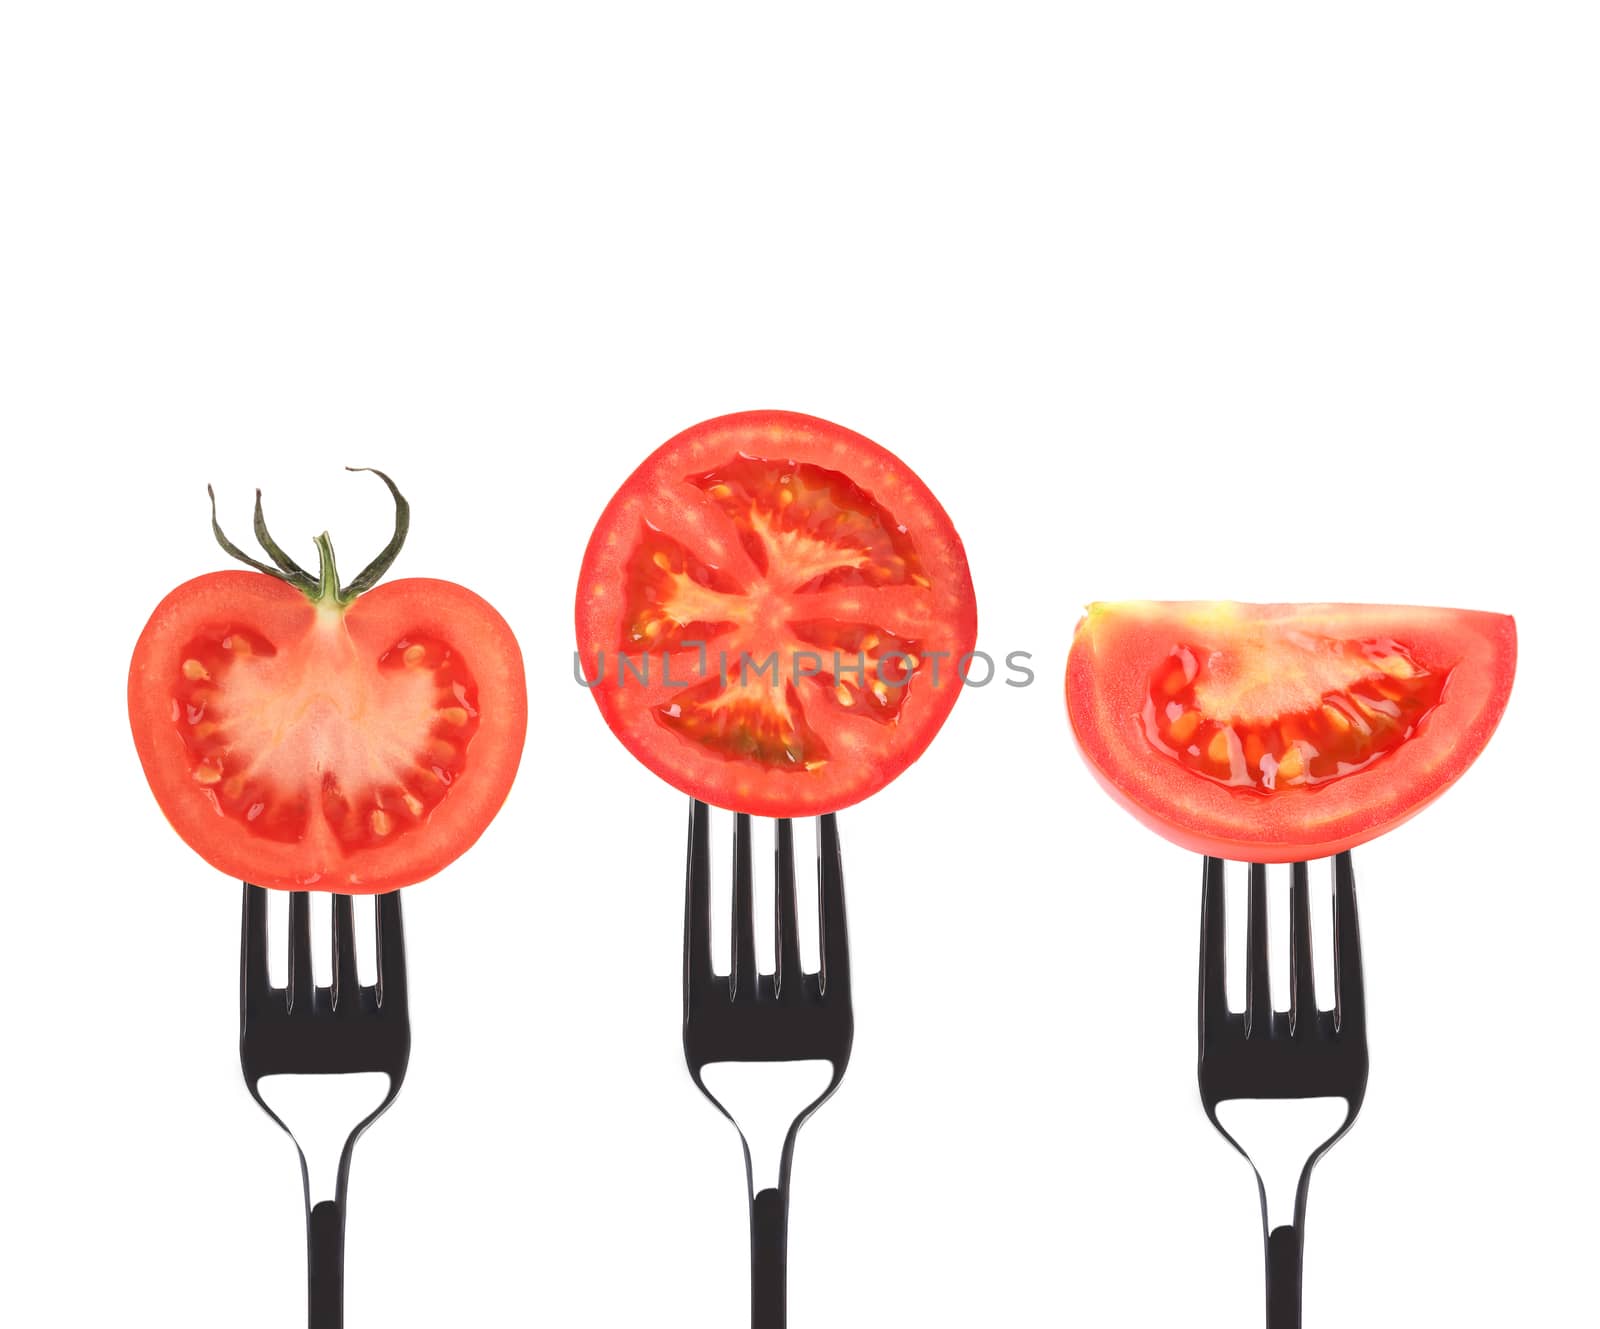 Tomato slices on forks. by indigolotos